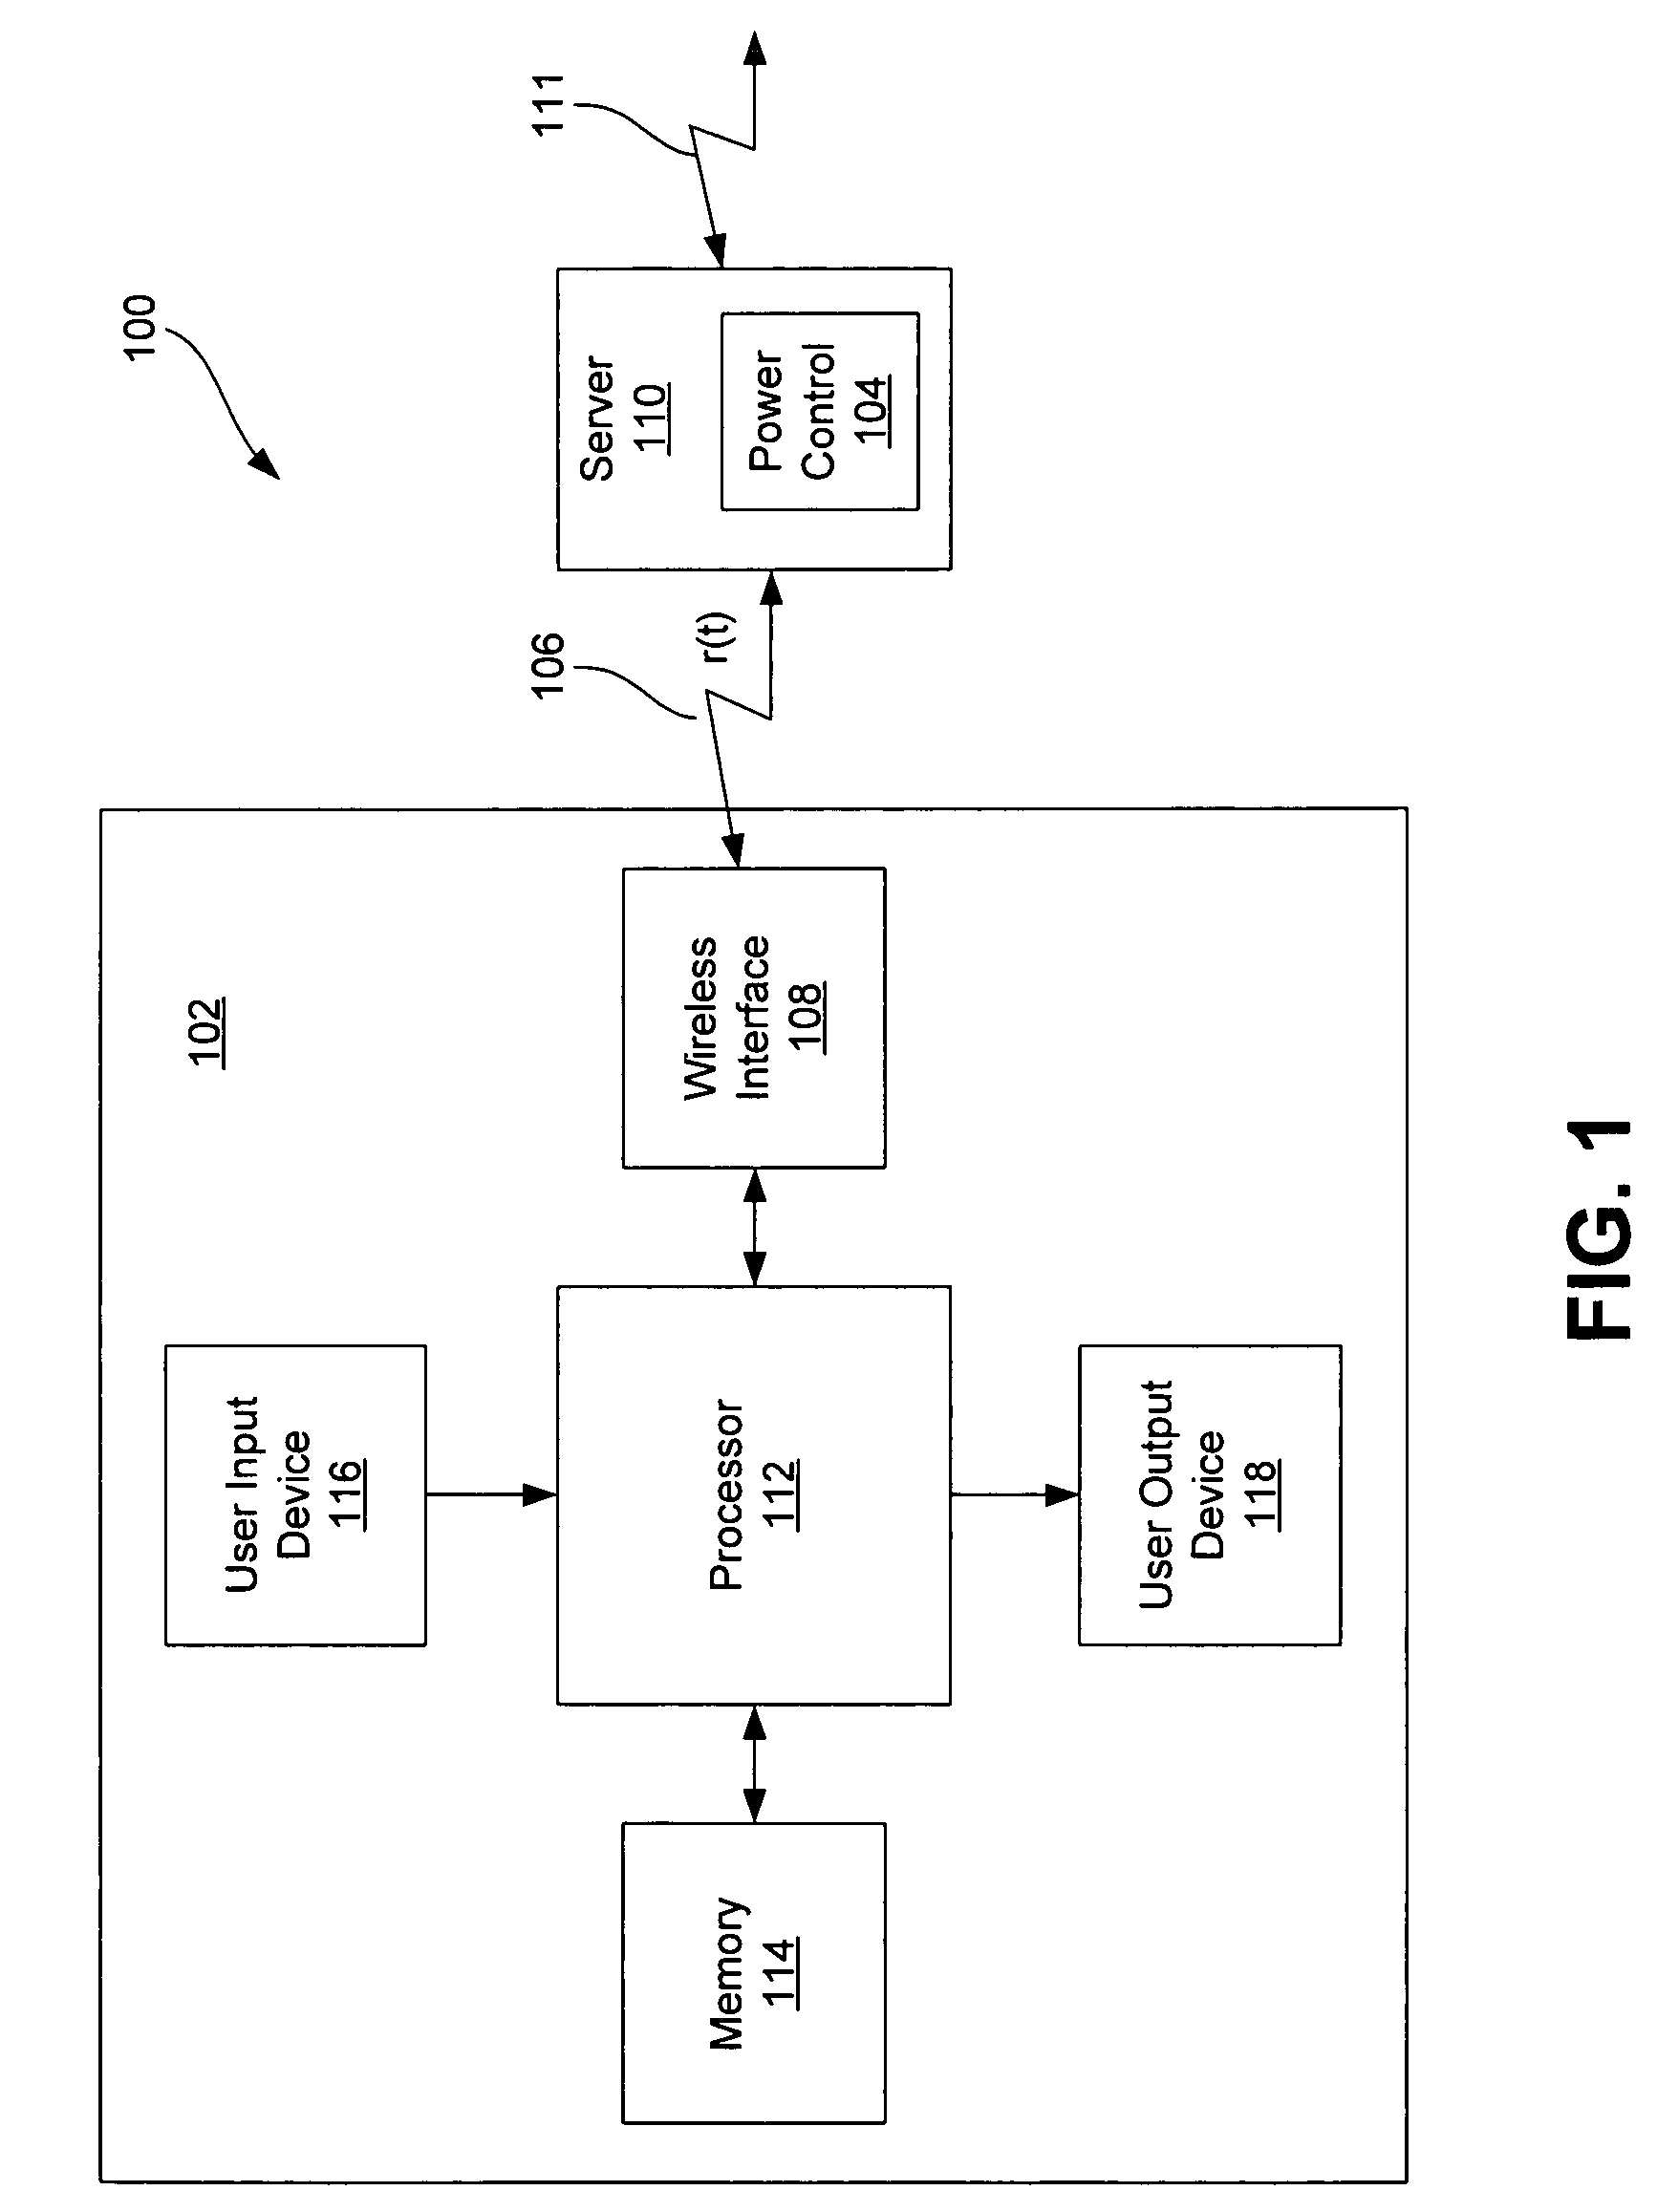 Method and system for power control in wireless portable devices using wireless channel characteristics